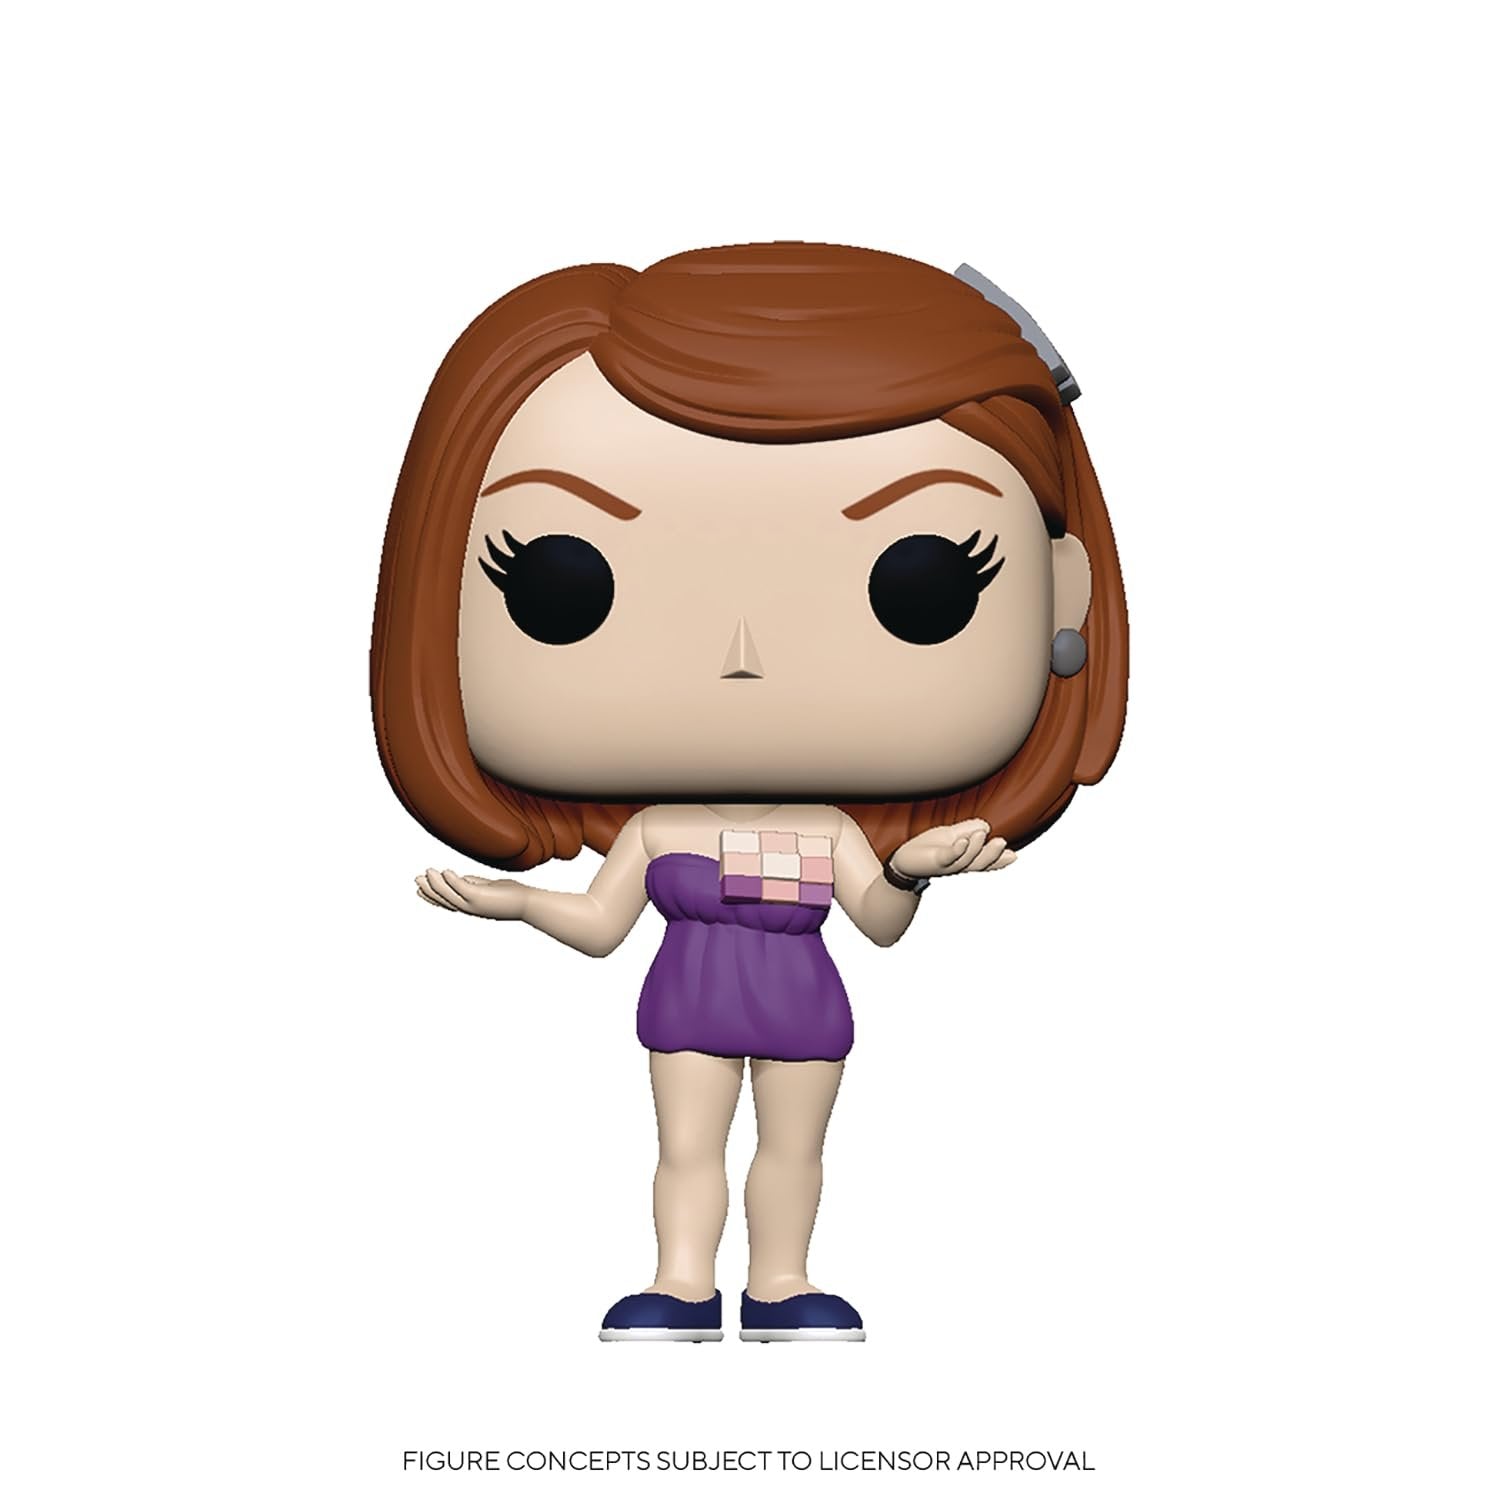 Funko Pop! TV: The Office - Casual Friday Meredith, Multicolor